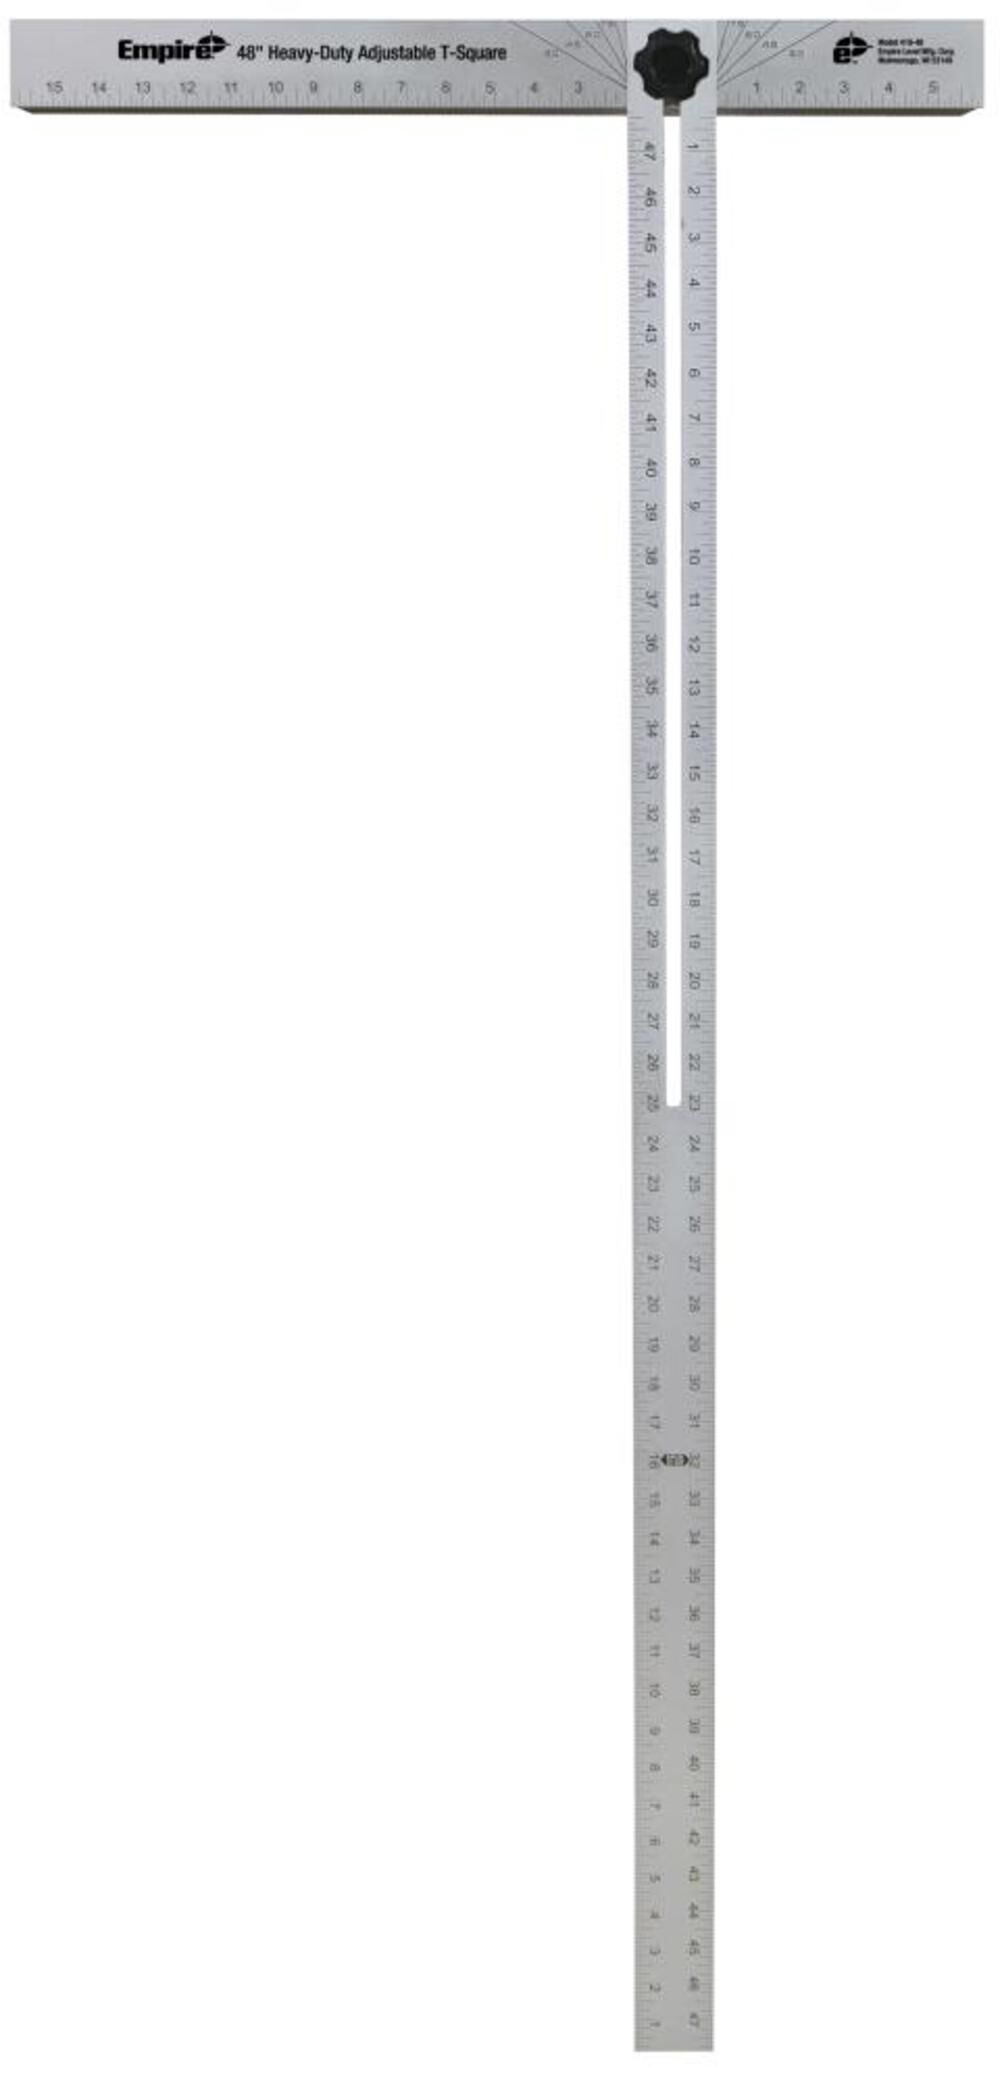 Empire 419-48 - 48 Adjustable Drywall T-Square